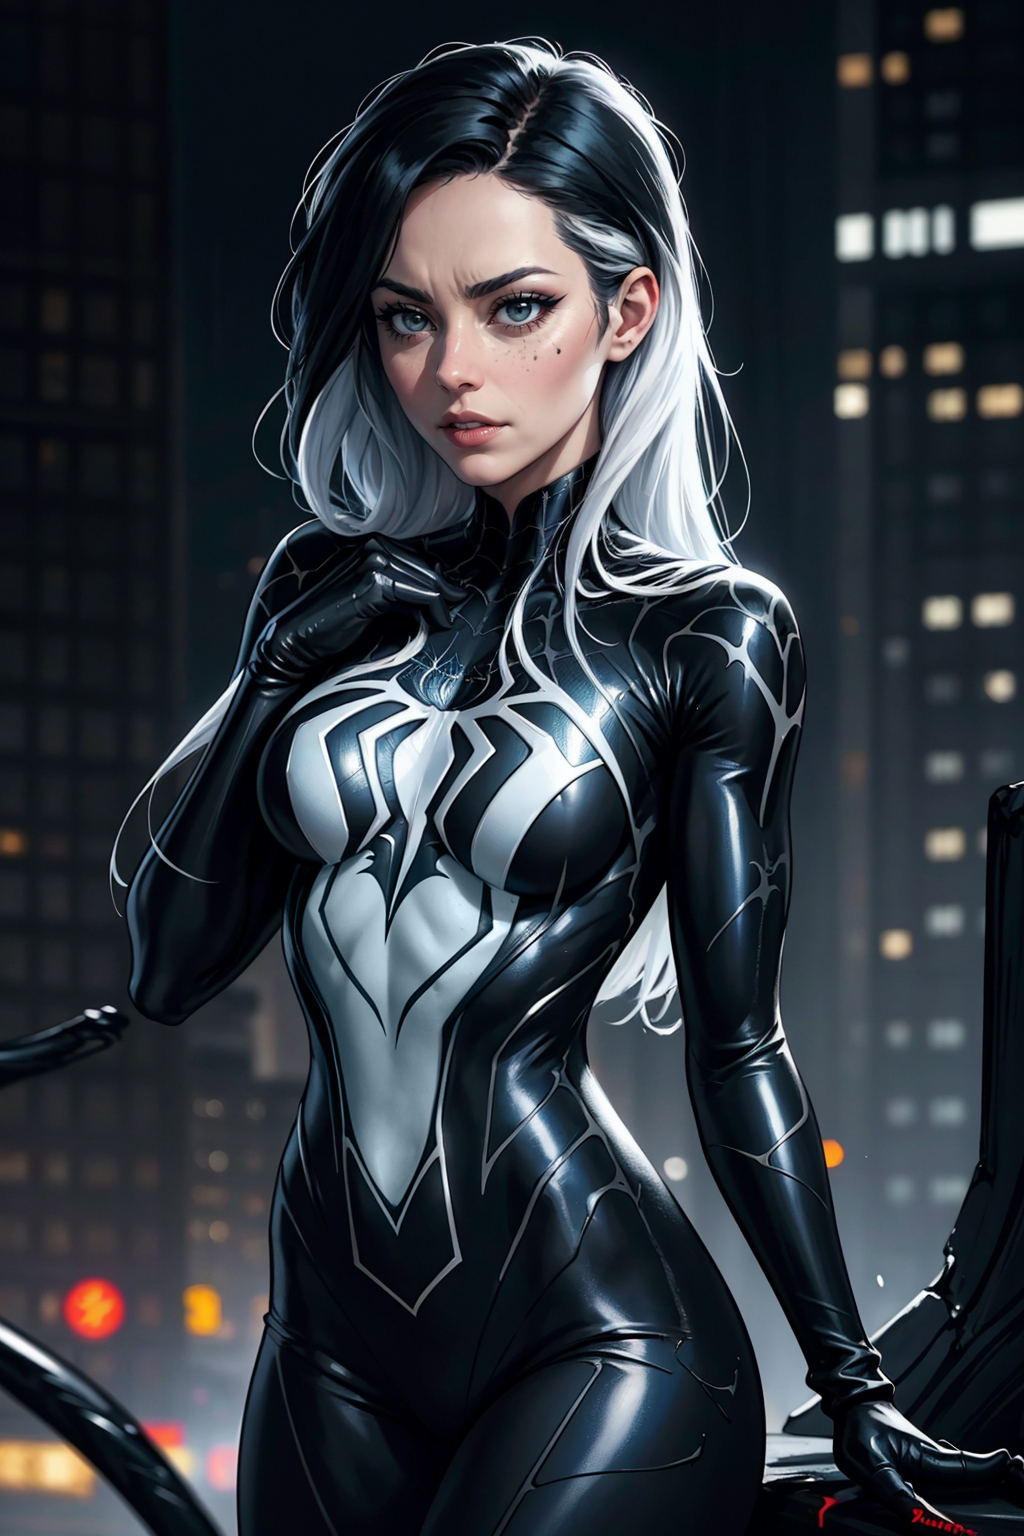 Spider-woman Symbiote suit (11) by Penguih on DeviantArt